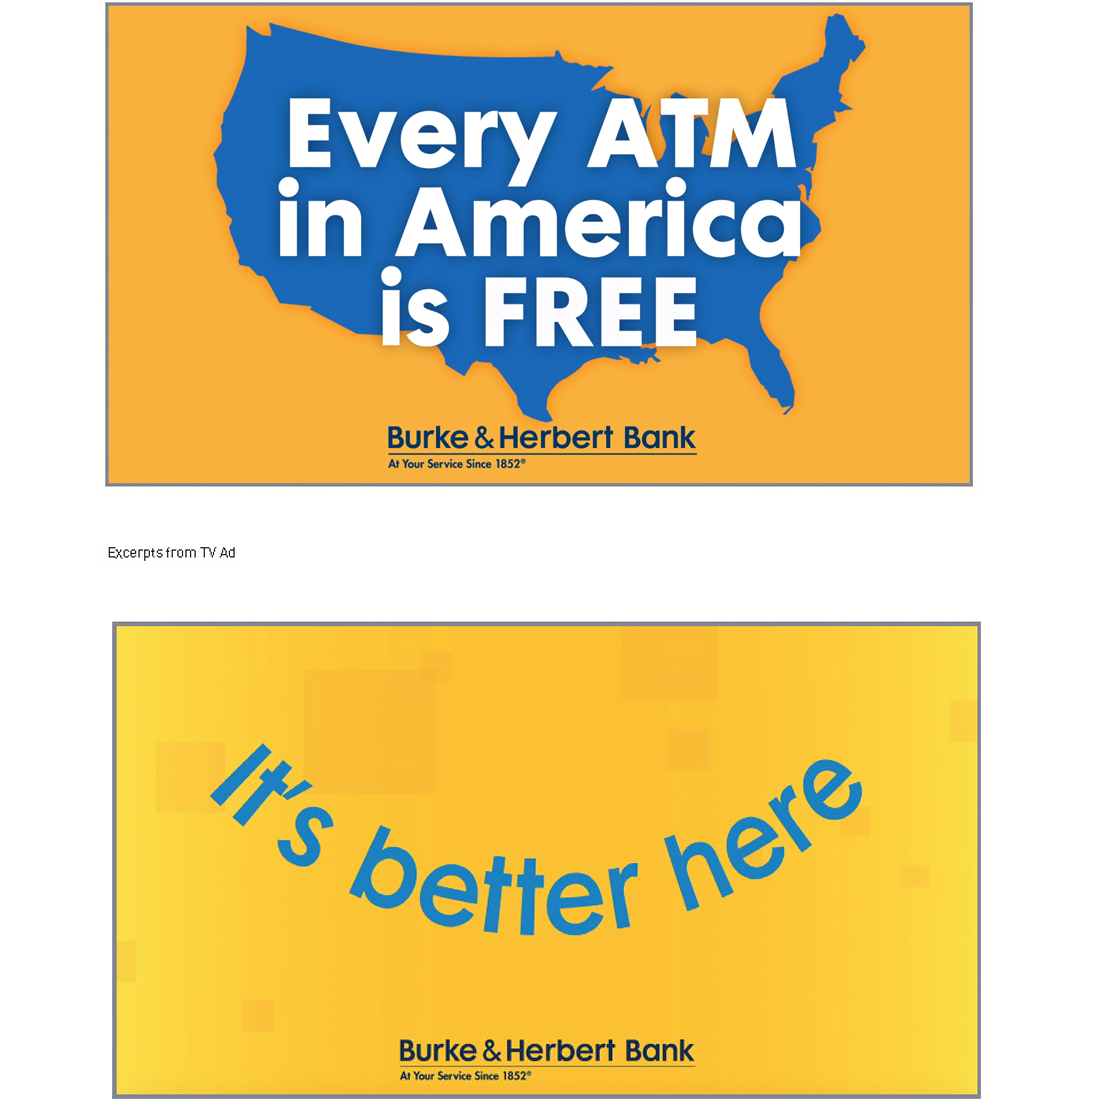 Burke and Herbert Bank TV ad slides with phrases, "Every ATM in America is FREE," and "It's better here."